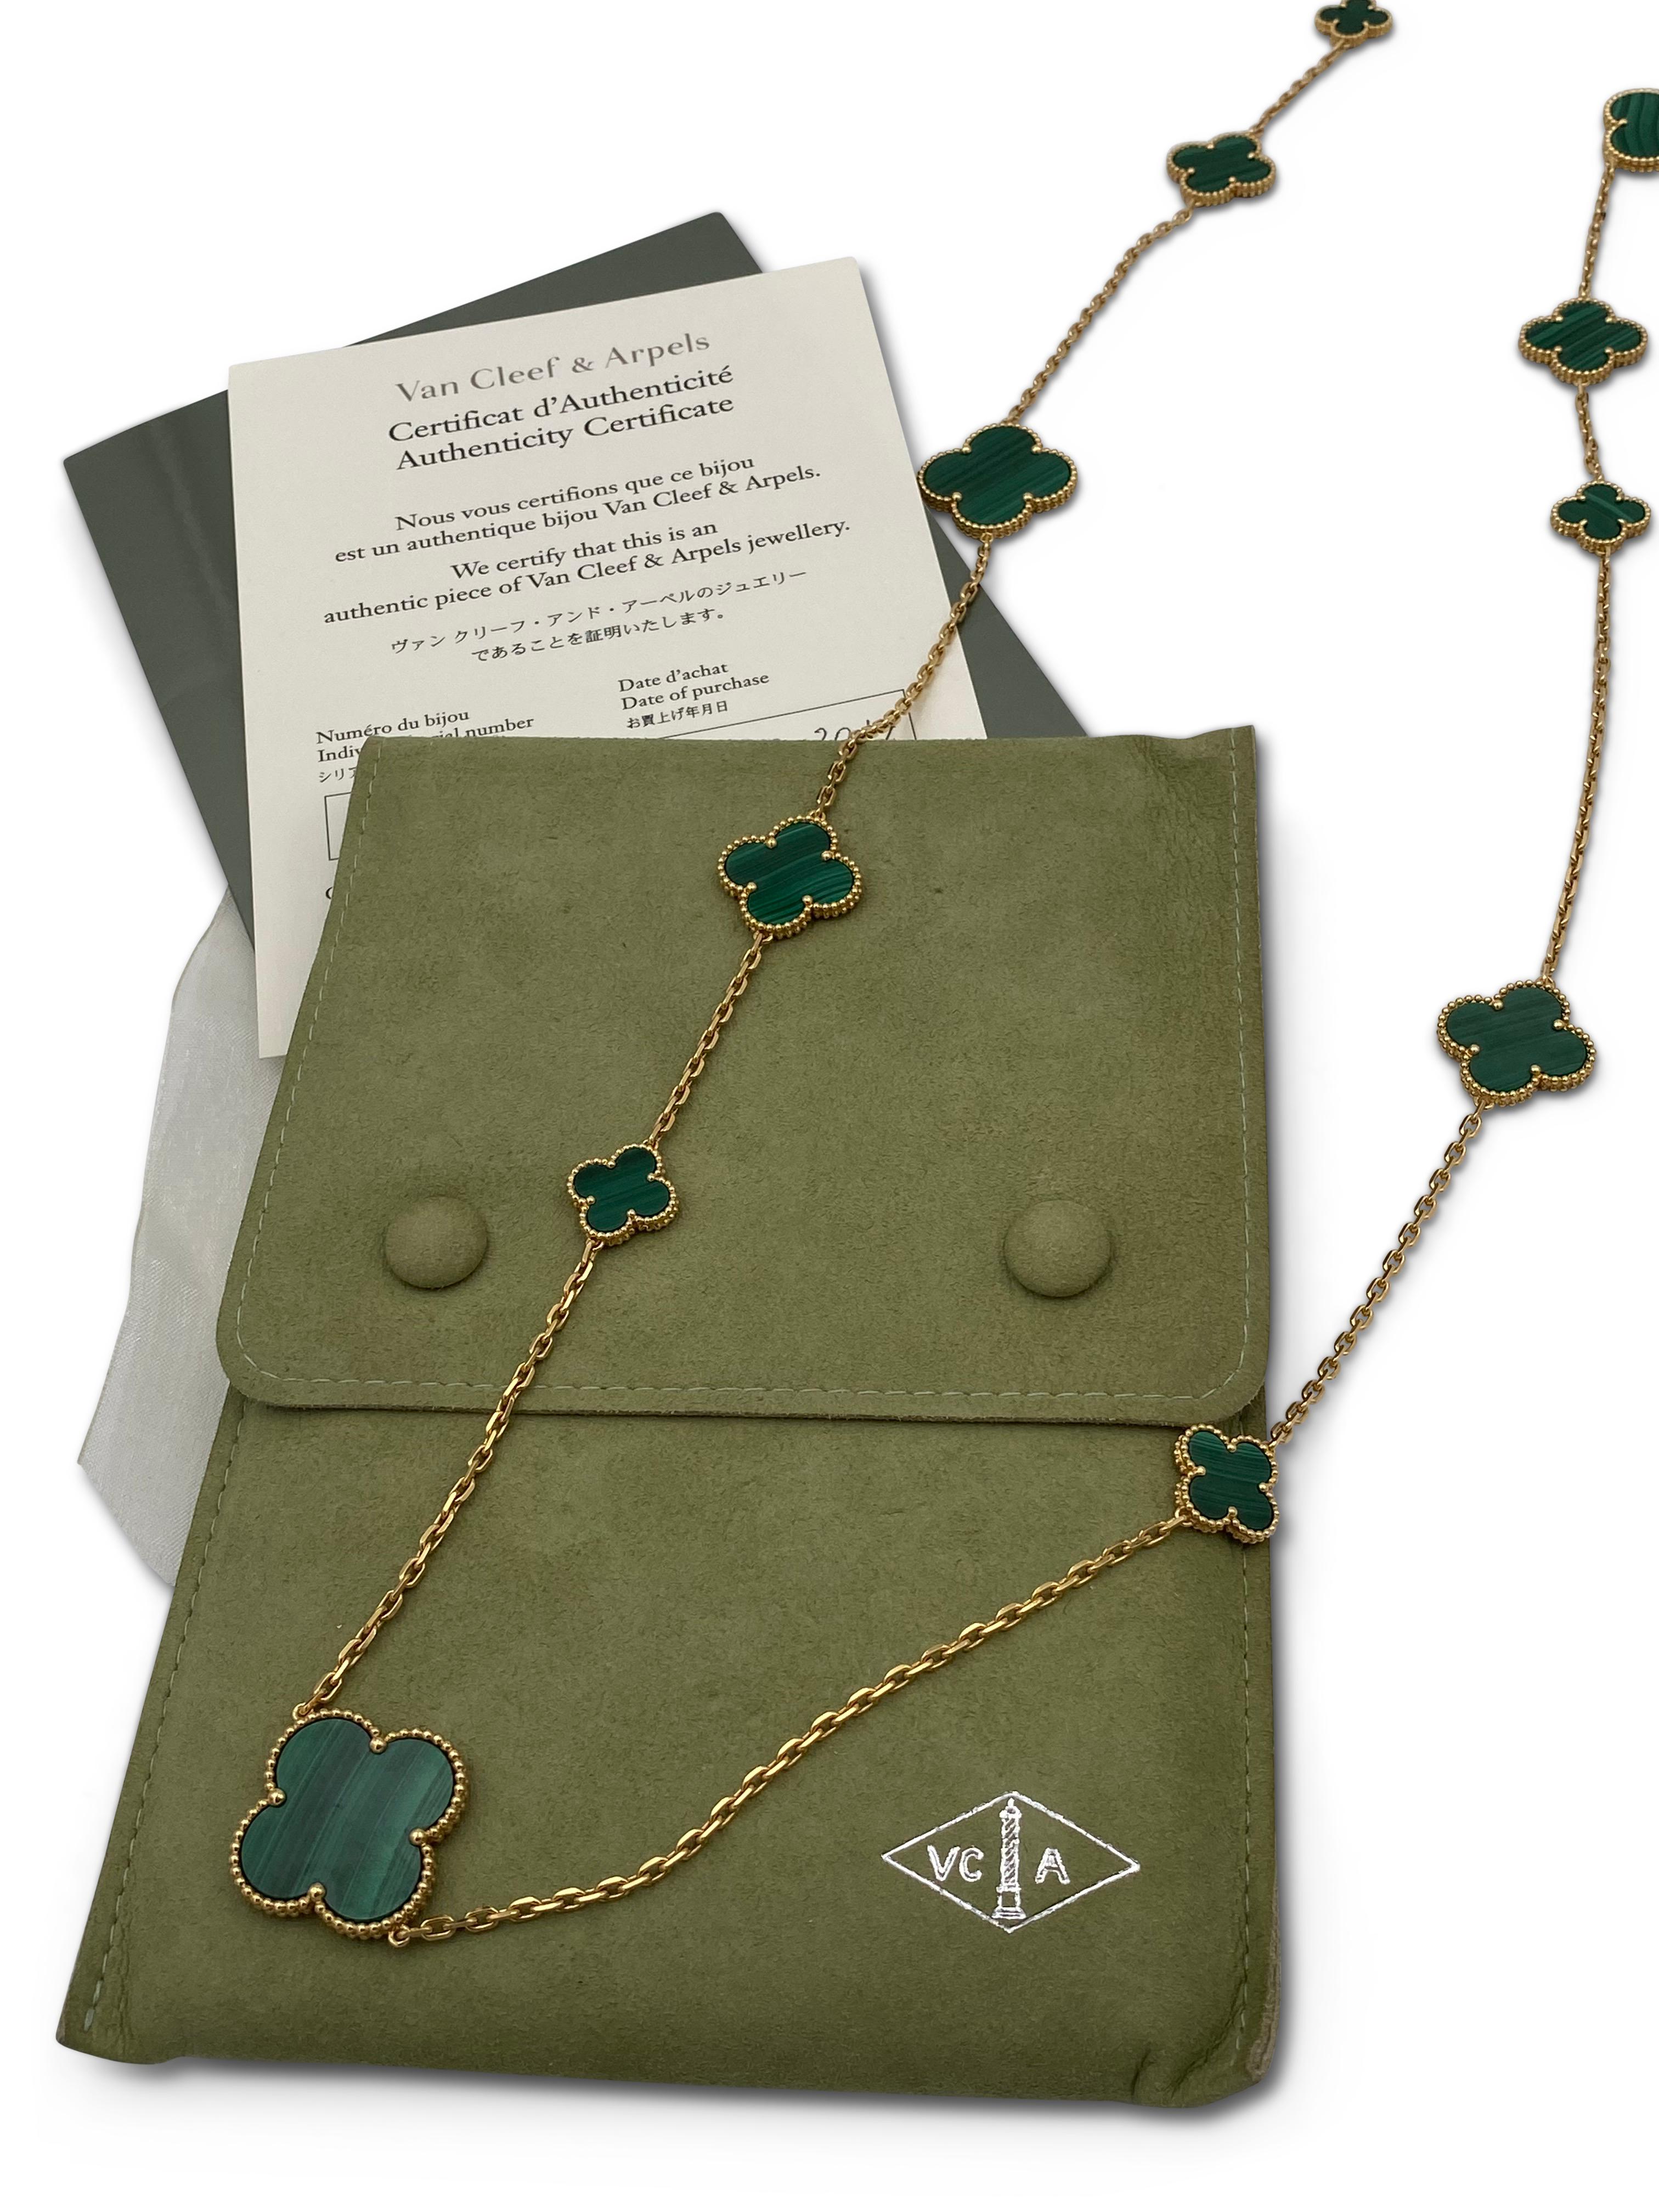 Authentic Van Cleef & Arpels 'Magic Alhambra' necklace crafted in 18 karat yellow gold featuring 16 clover leaf inspired motifs of malachite stones. Signed VCA, Au750, with hallmarks. Measures 50 3/4 inches in length. The necklace is presented with